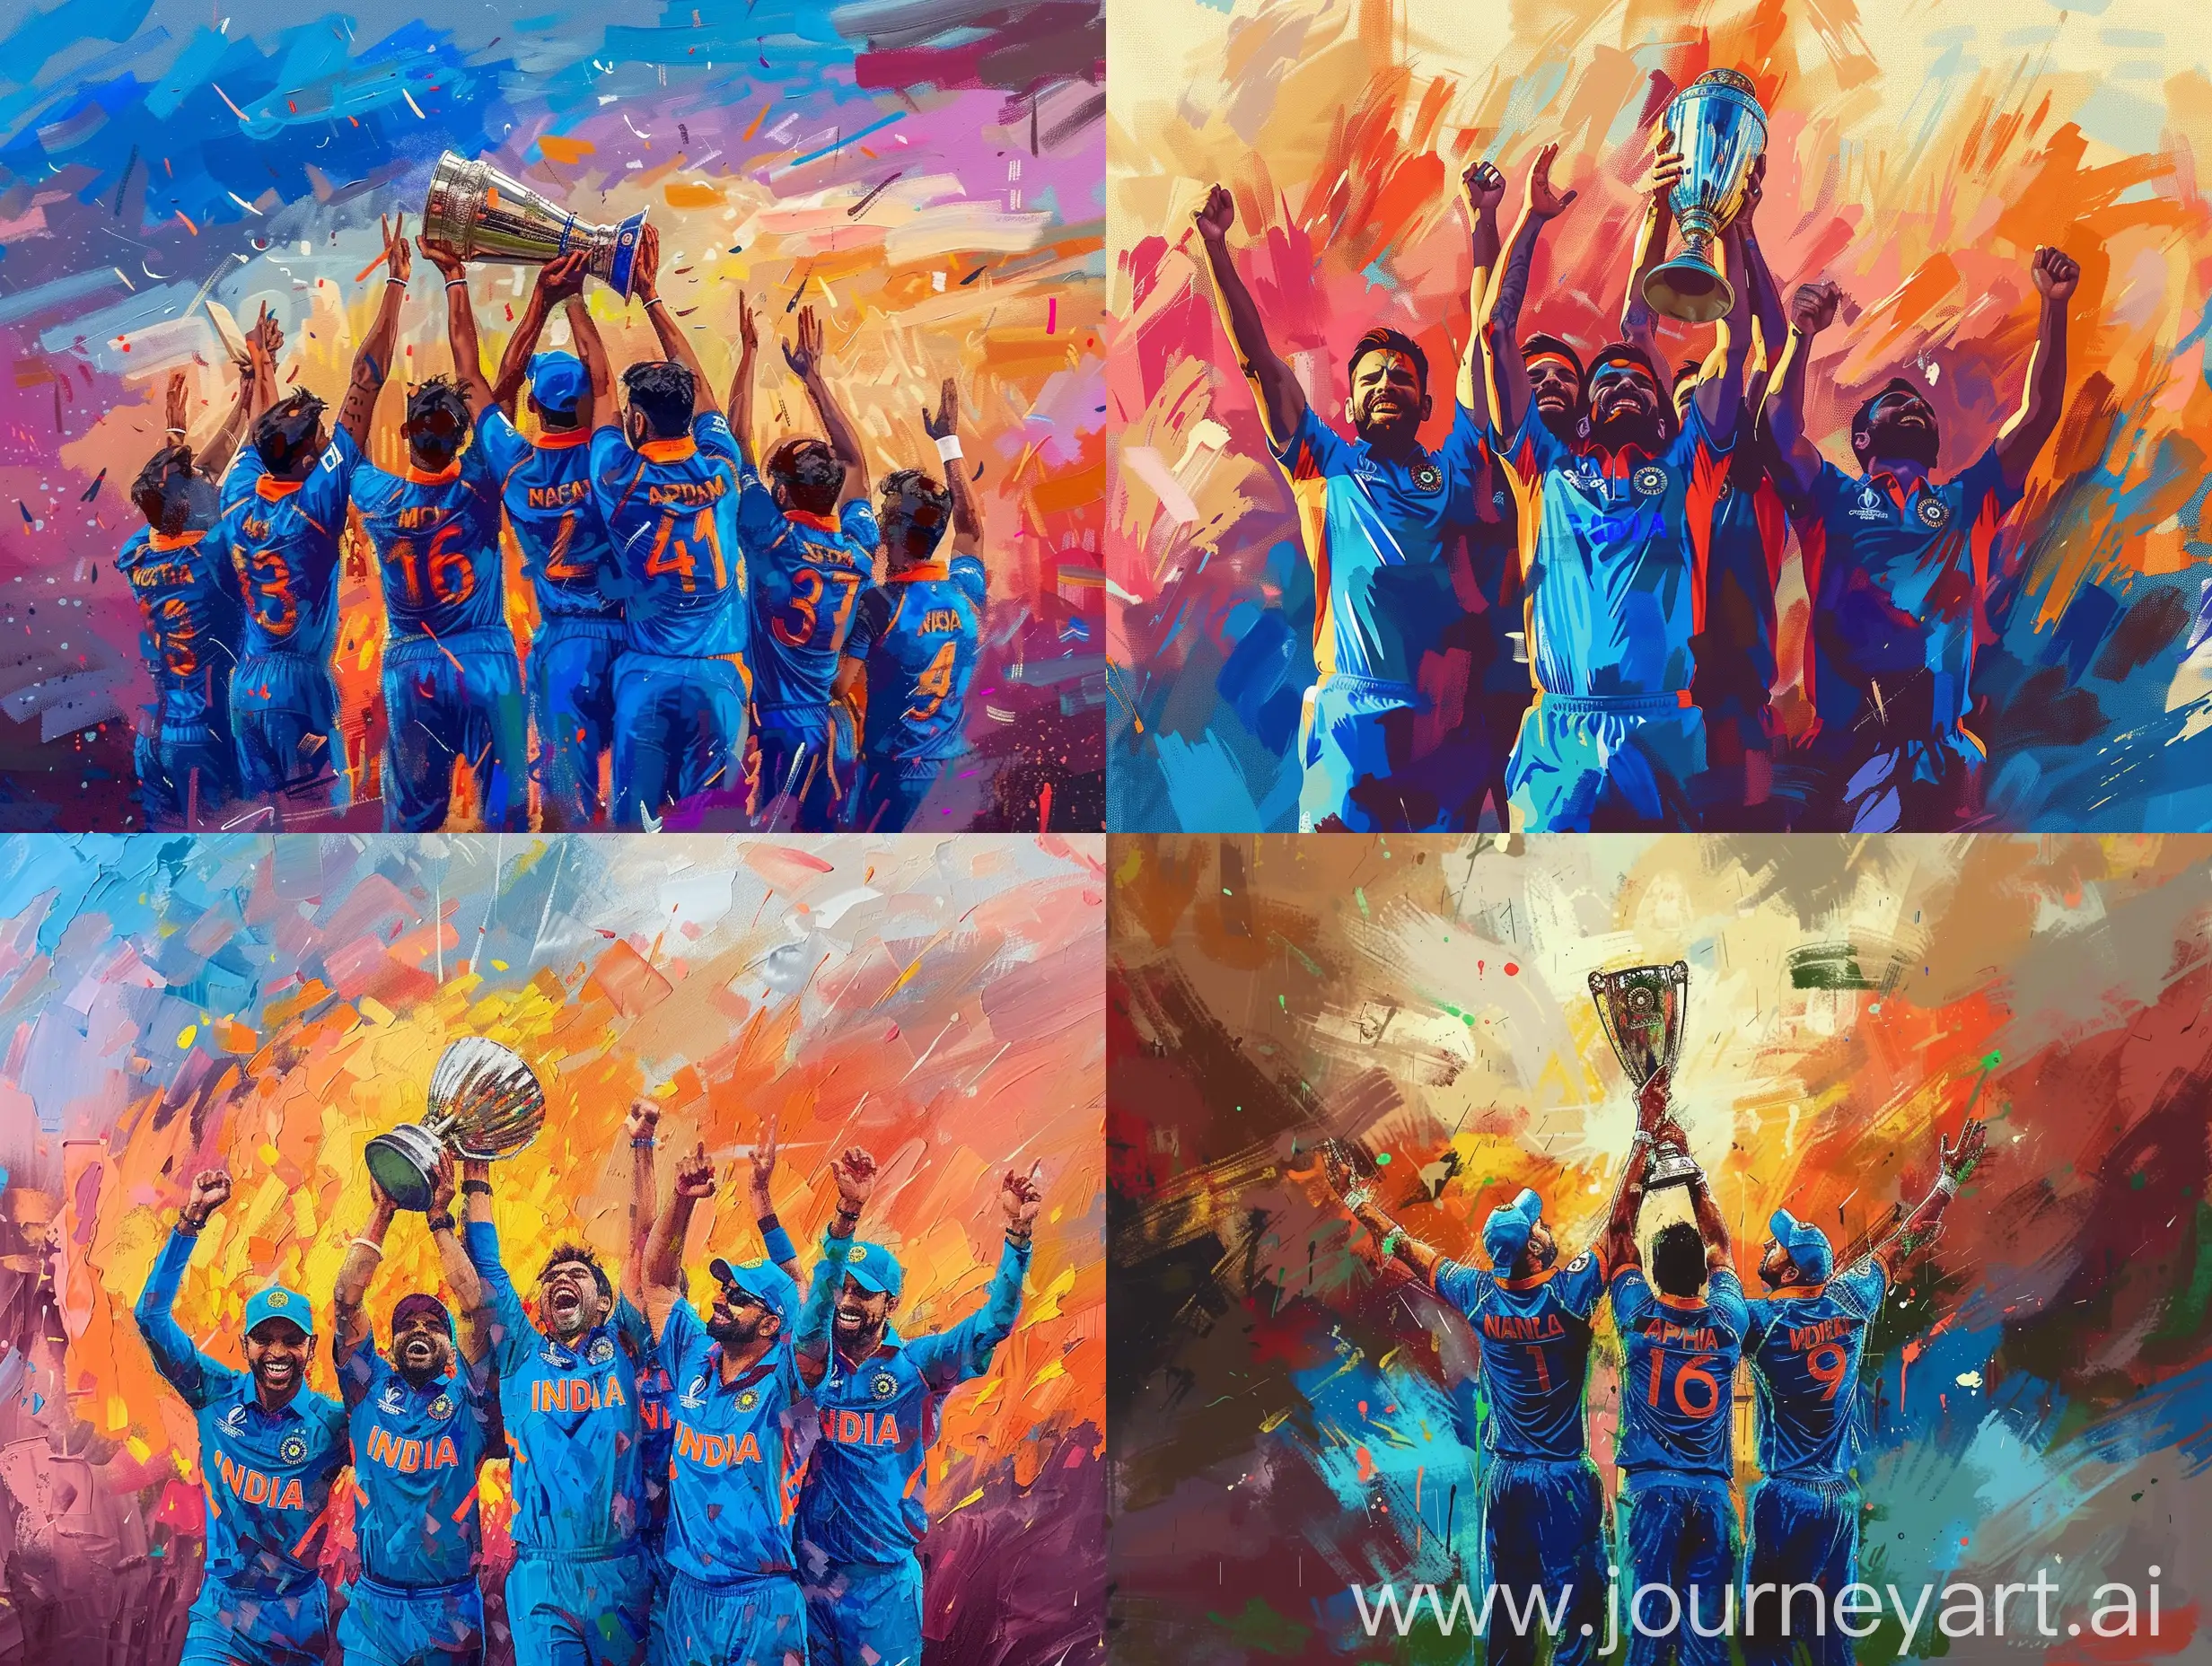 Team-India-Players-Celebrating-Cricket-World-Cup-Victory-at-Dusk